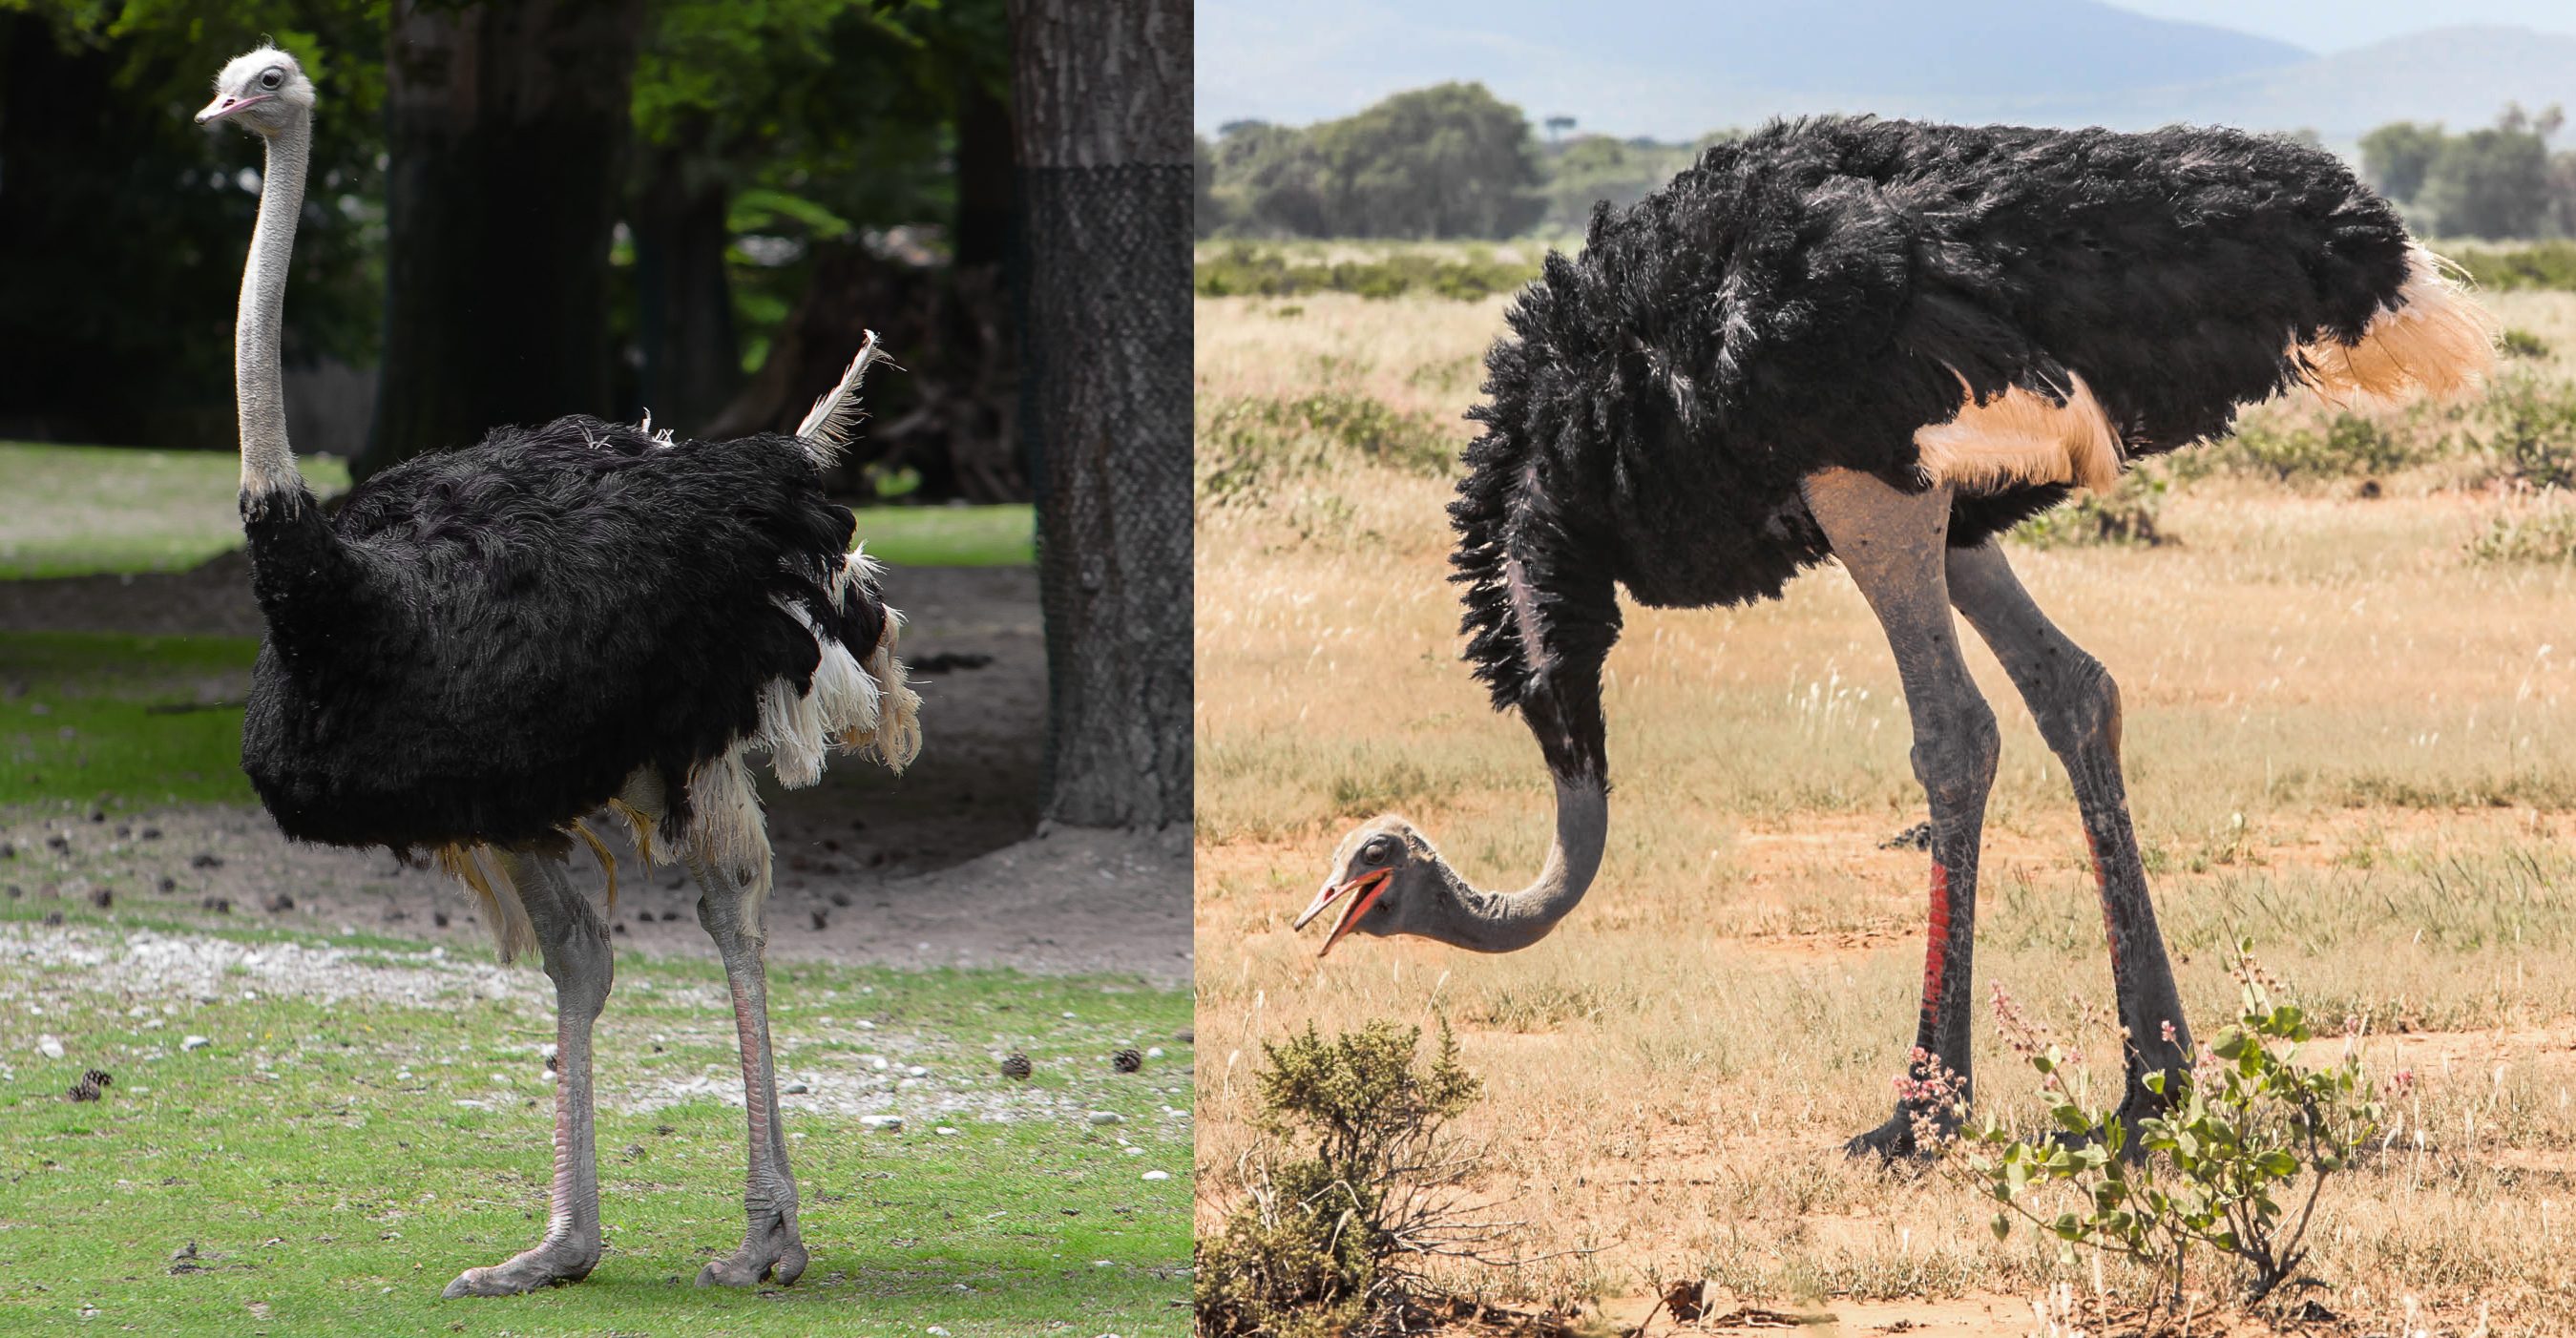 Are ostriches birds or animals?